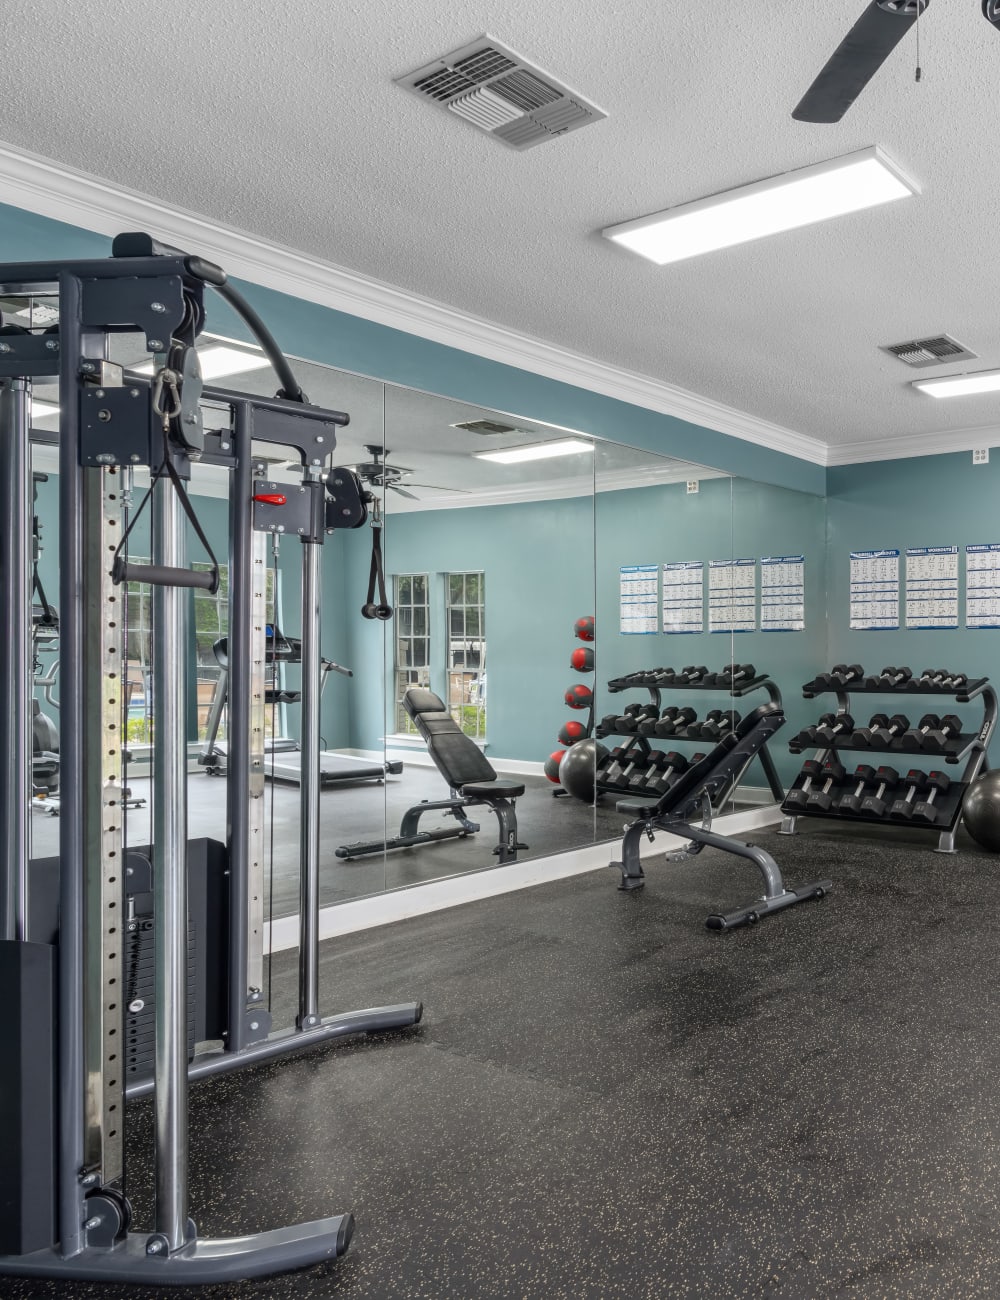 The community fitness center at Lenox Gates in Mobile, Alabama